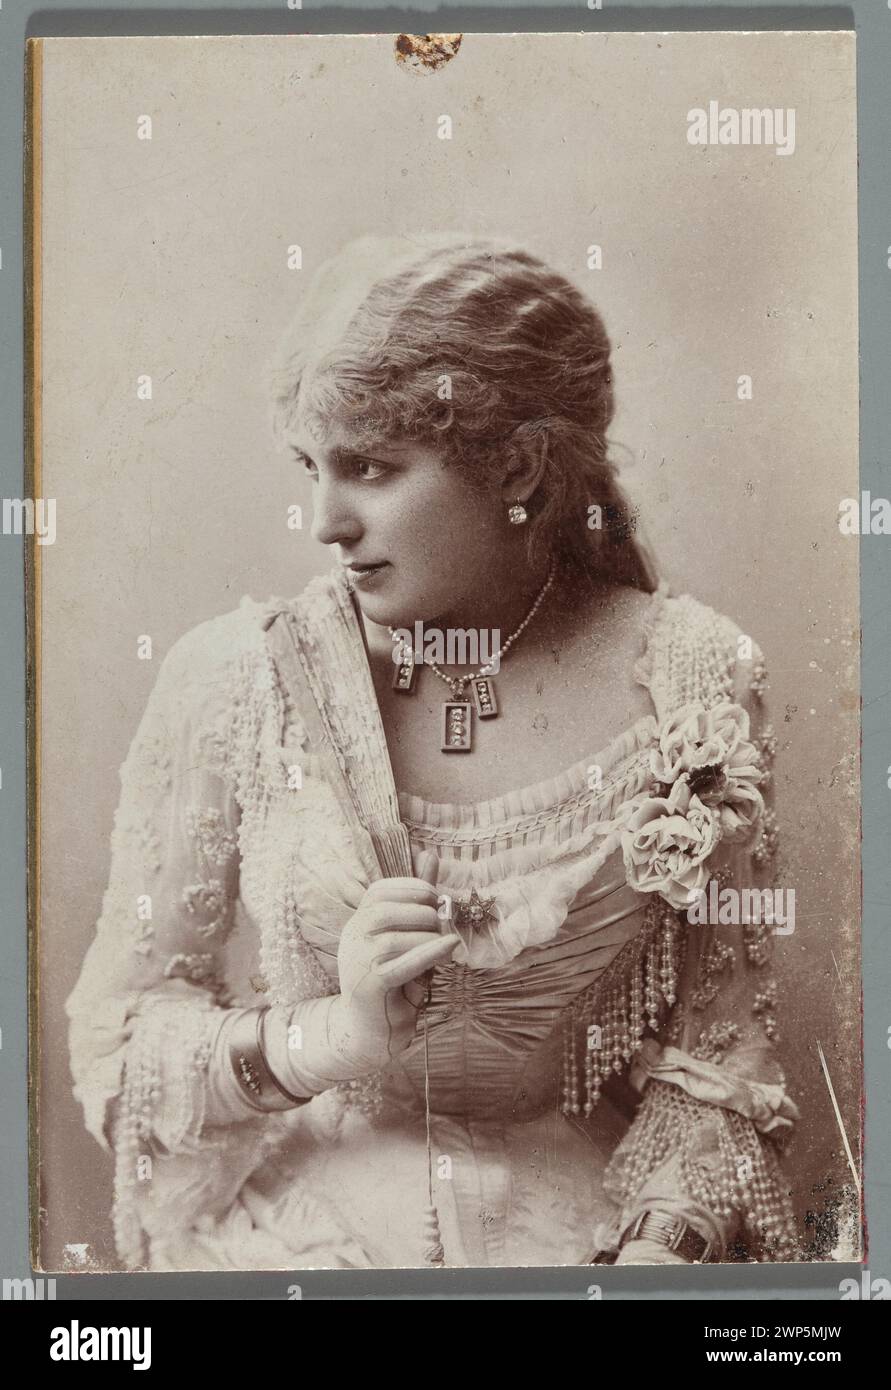 Portrait of Maria Wisnowska (1858 or 1860-1890), actress (later a character); Mieczkowski, Jan (1830-1889); around 1890 (1880-00-00-1890-00-00);Rajchman, Aleksander (1855-1915)-collection, Wisnowska, Maria (1858 cars 1860-1890), Wisnowska, Maria (1858 cars 1860-1890)-iconography, actors, jewelry, cartes de visite (photographer), pearls, Poland (culture), portraits, female portraits, message (provenance), theater (artist), fans Stock Photo